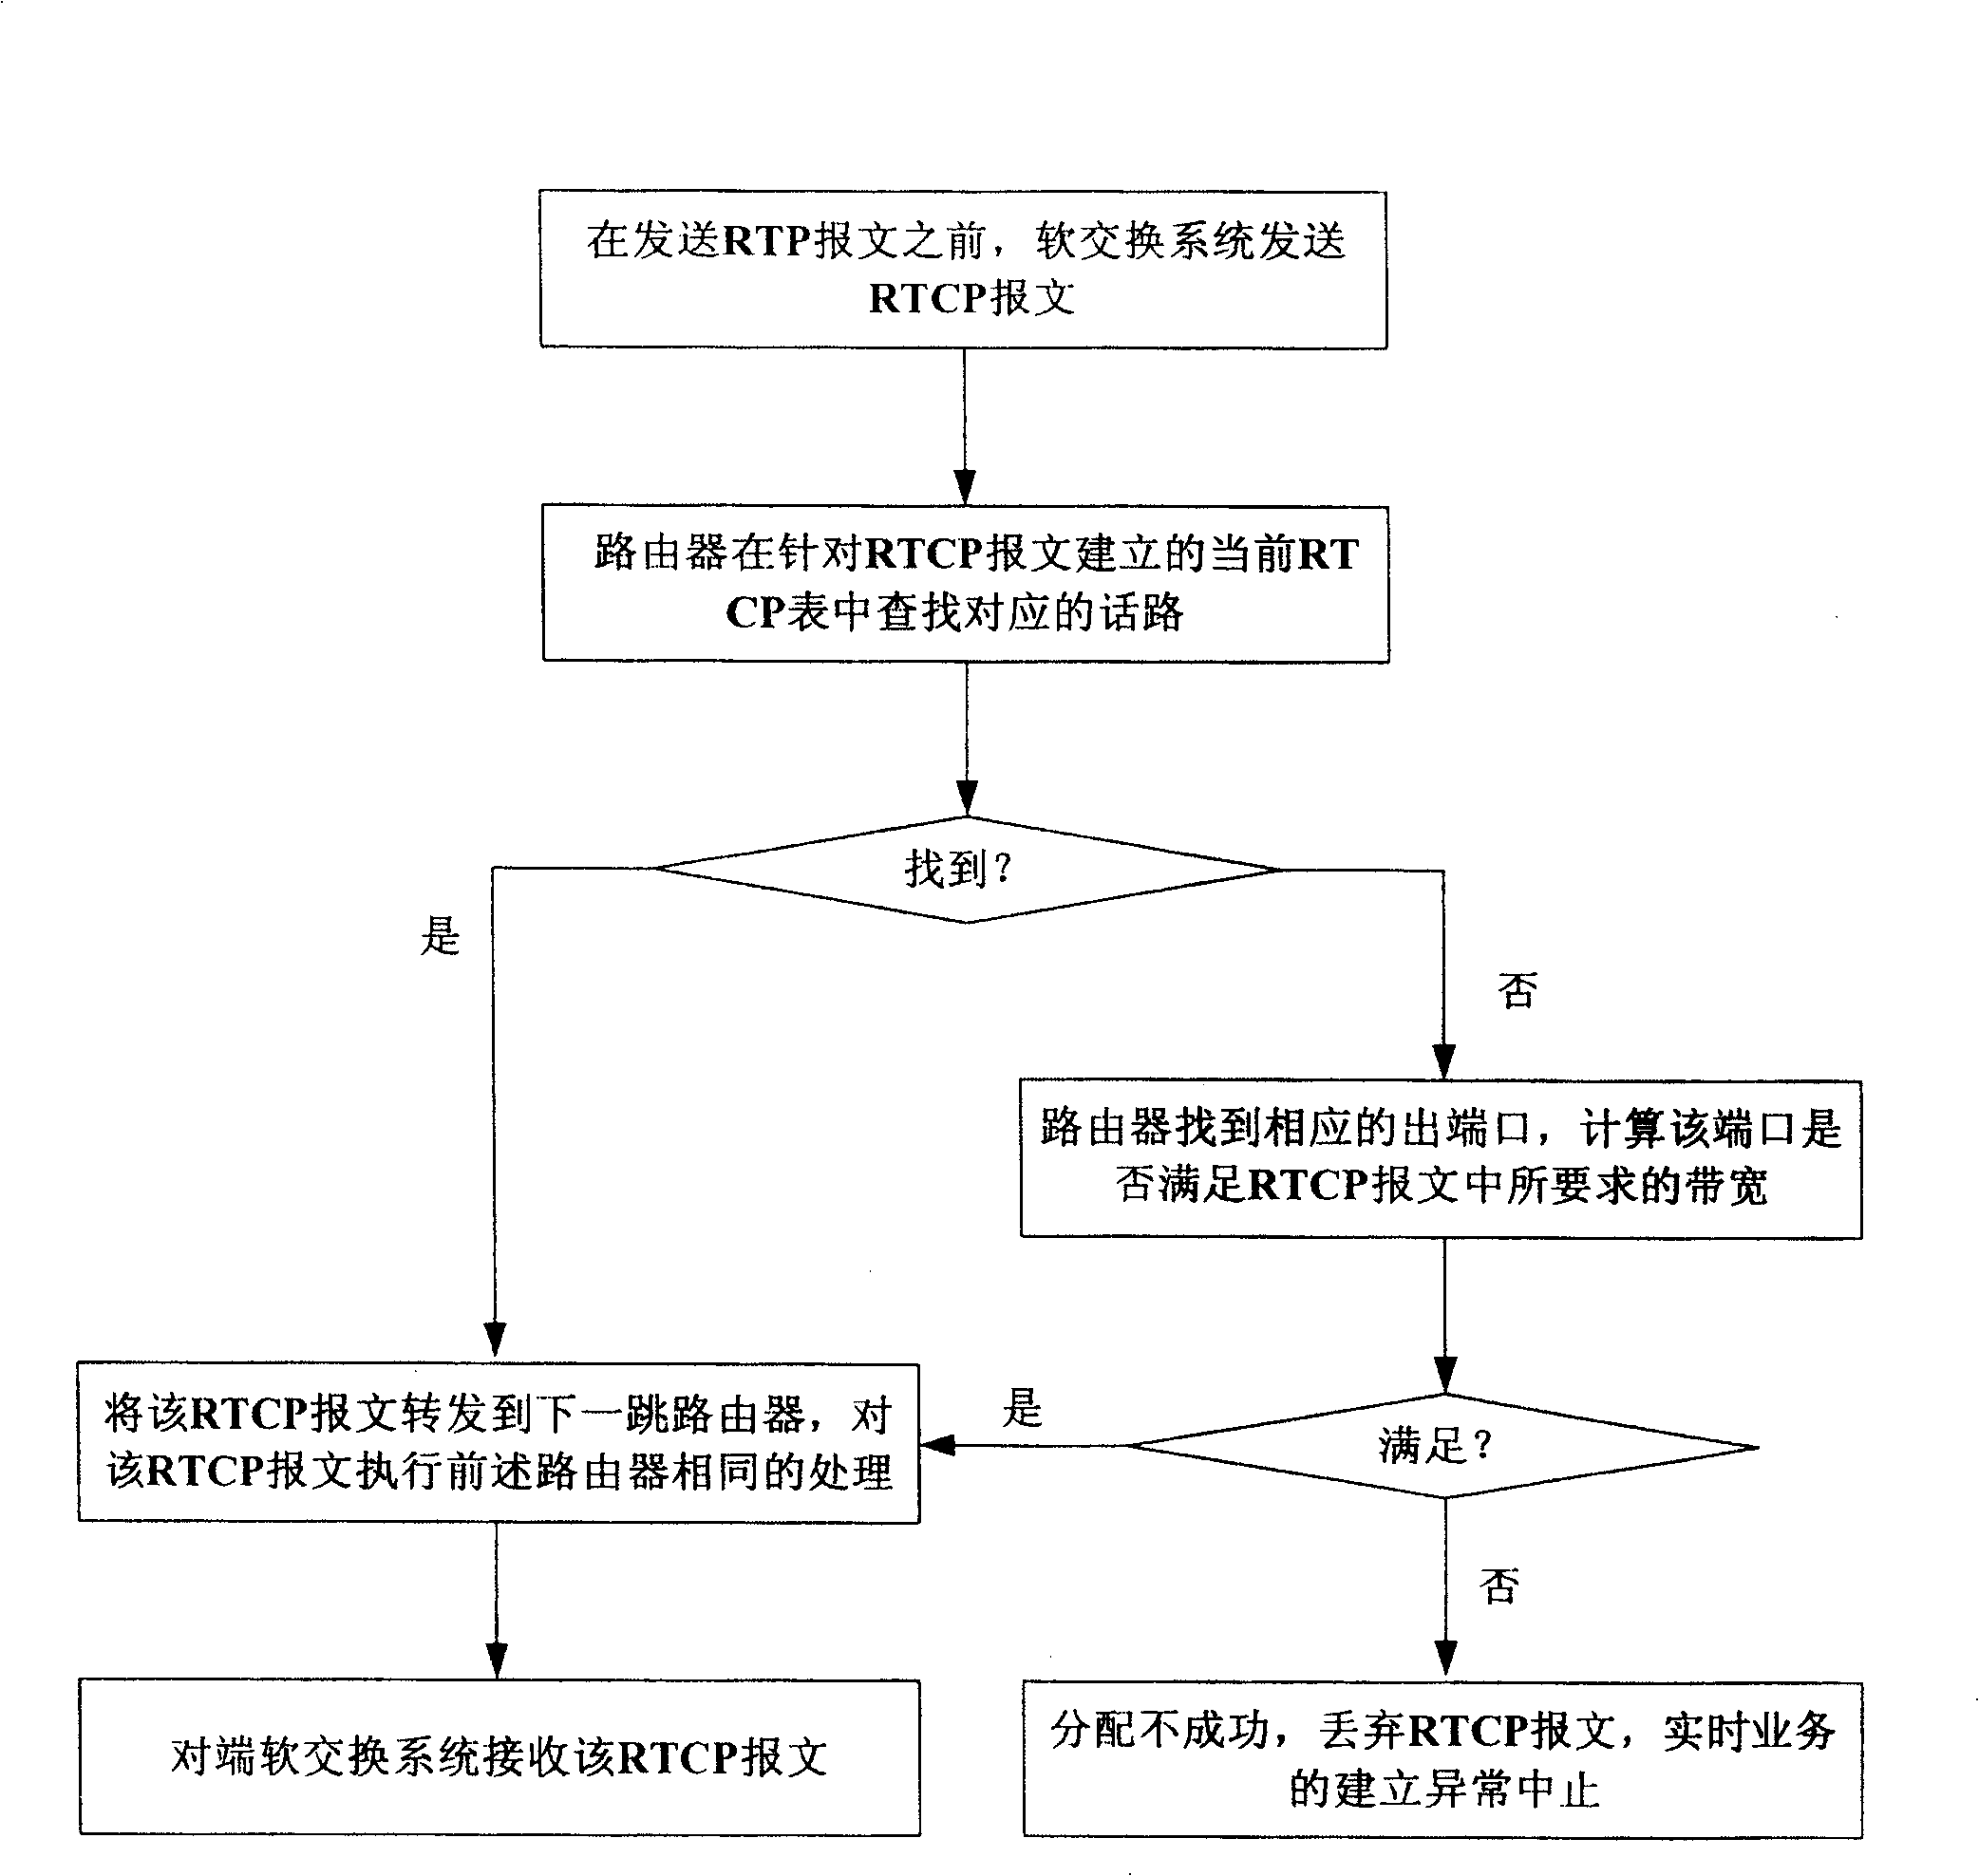 Method for controlling real time service on router